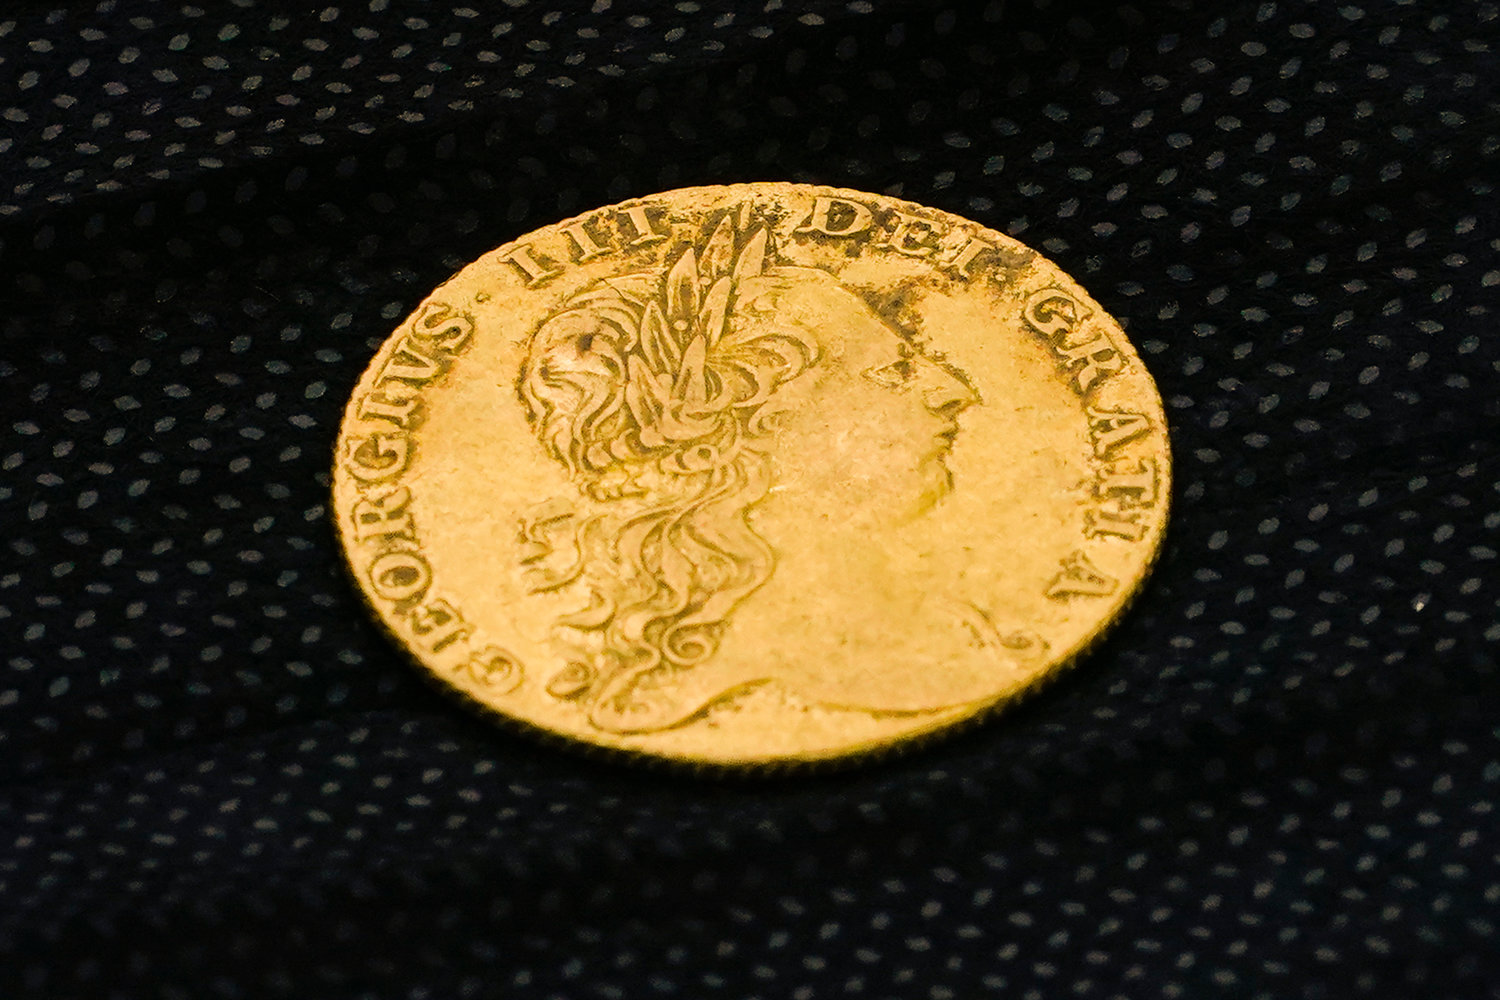 Shown is a King George III gold guinea, discovered in an excavation site at the Red Bank Battlefield Park in National Park, N.J.